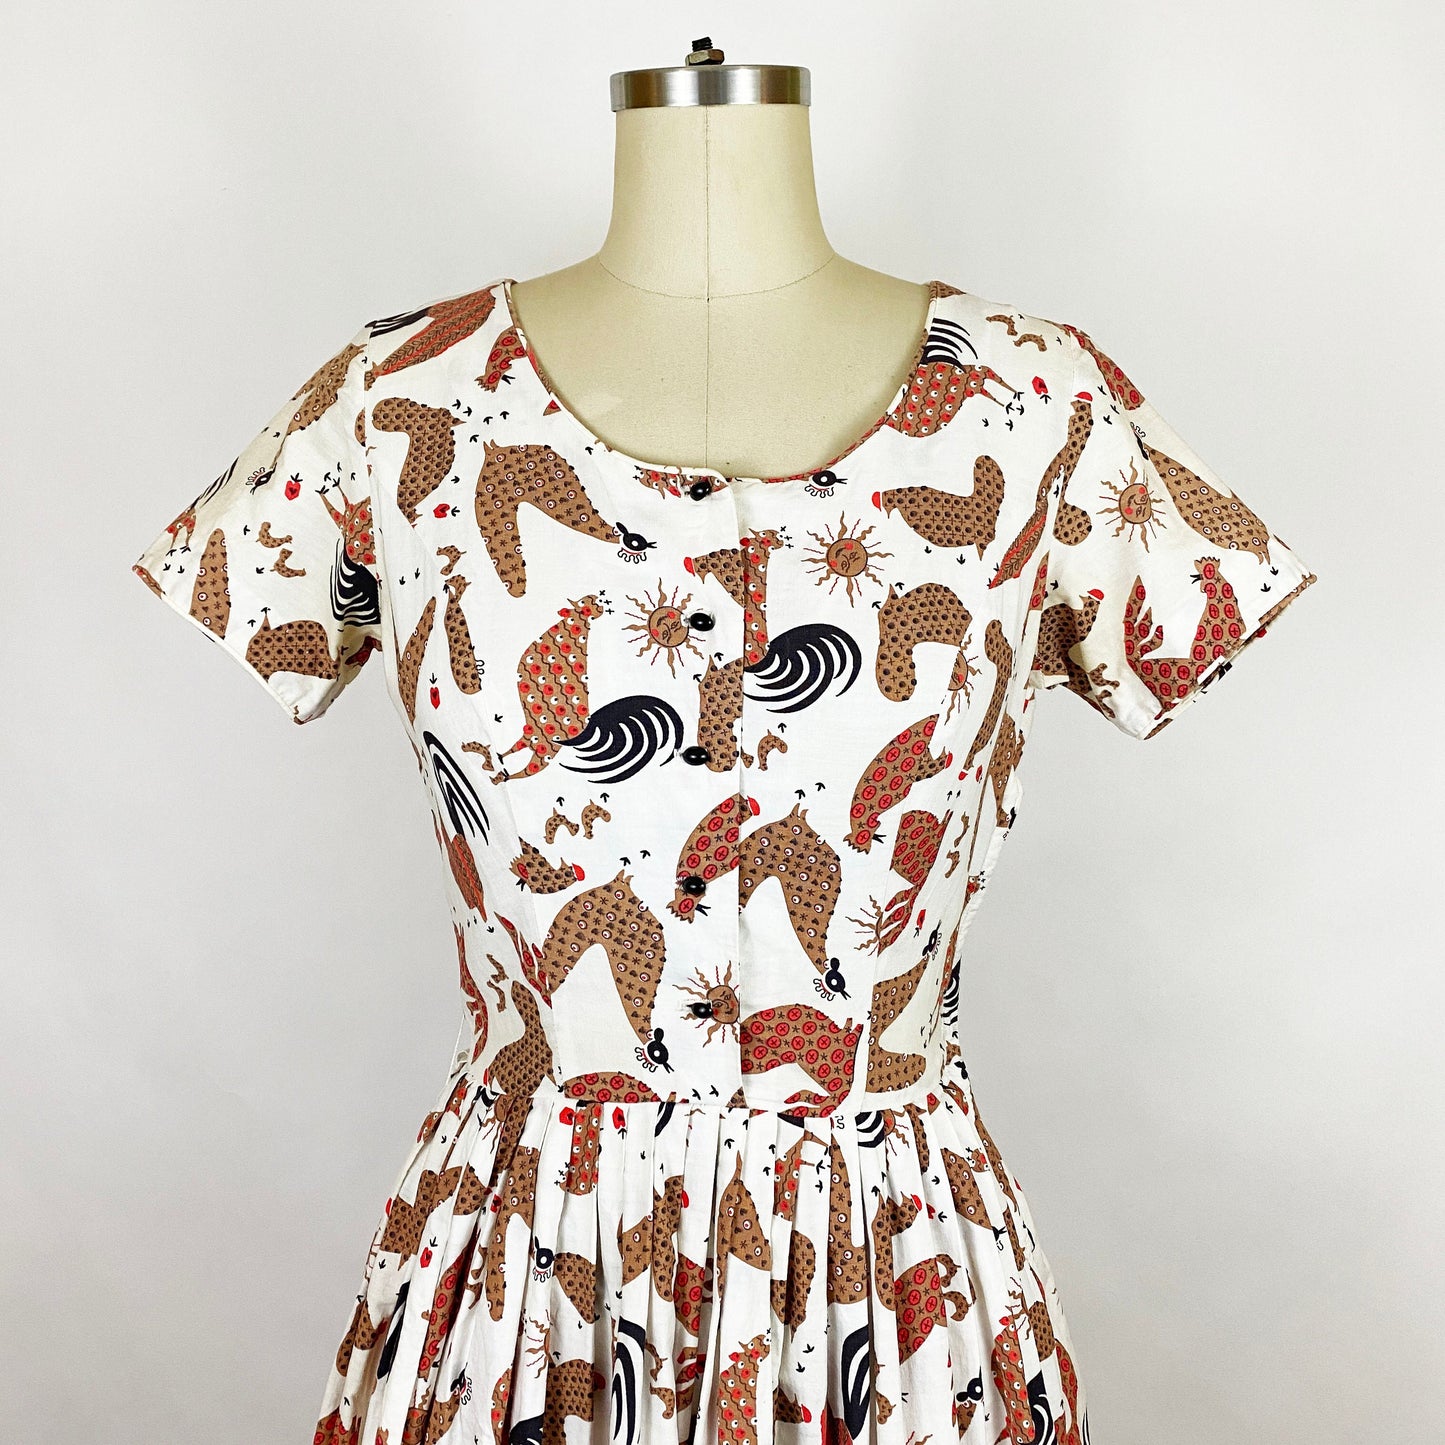 1950's Novelty Print Chicken Roosters Fit and Flare Dress Cotton Retro 50s Mid Century Rockabilly Vintage Robbie Reid / Extra Small / 24" Waist